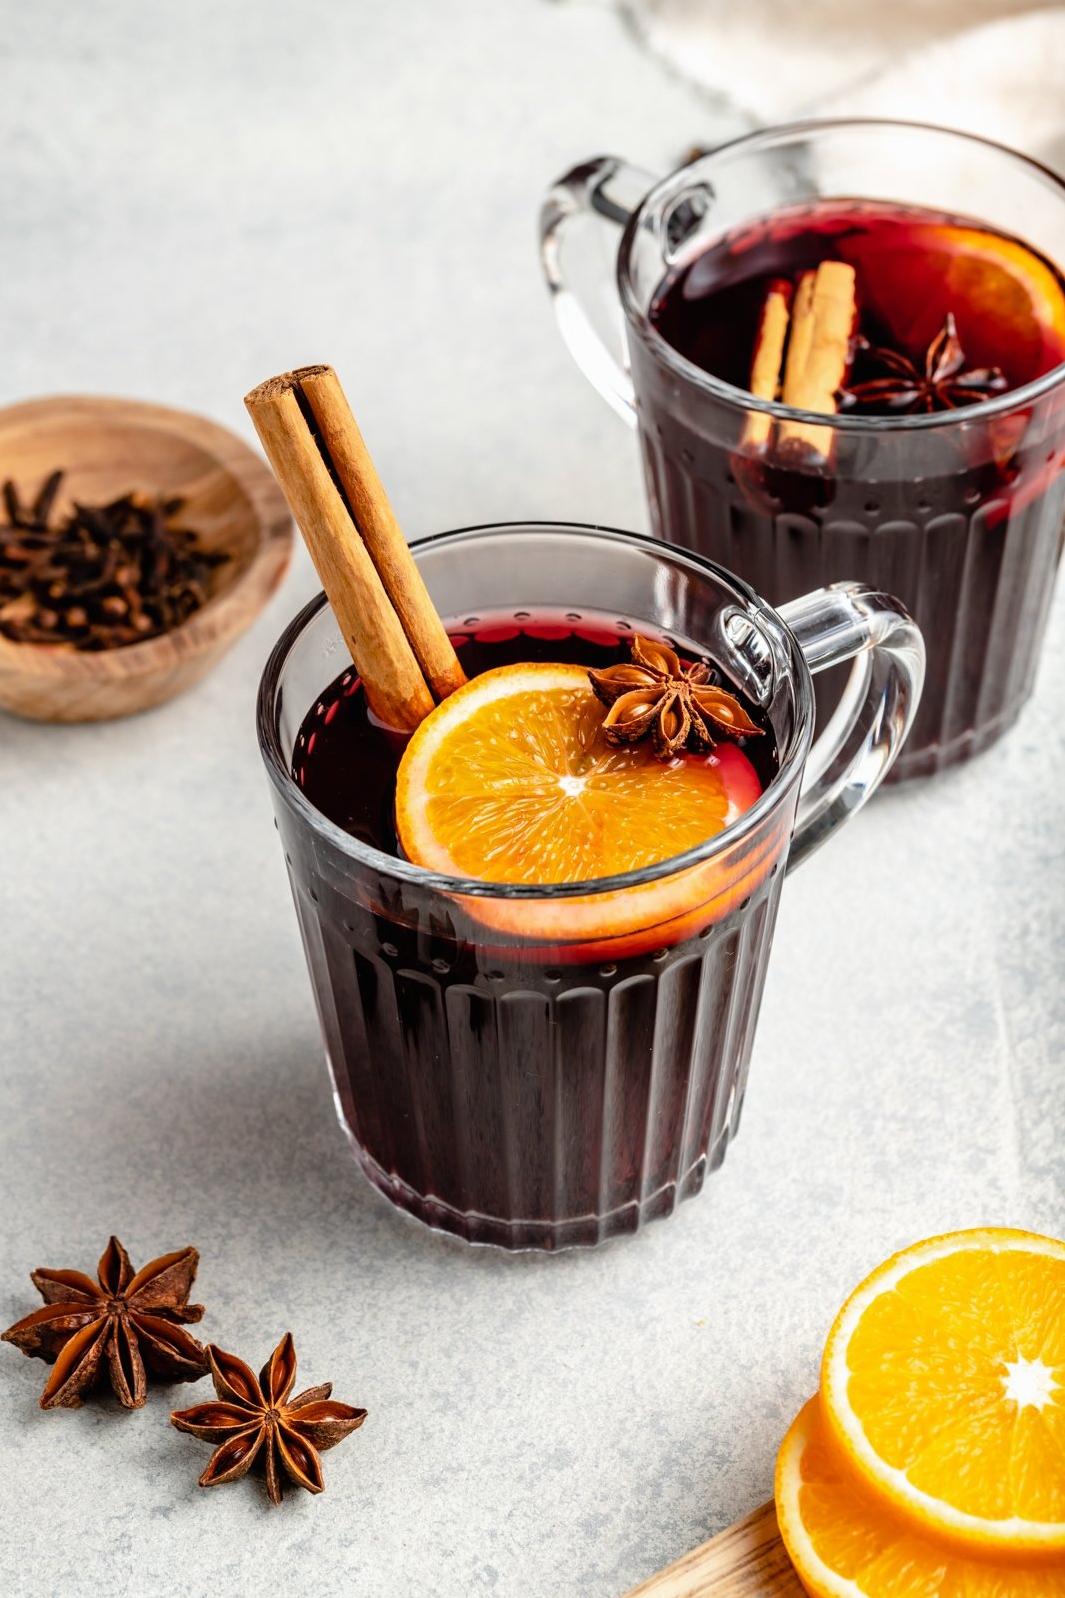  Sip on a Christmas miracle with this easy-to-make spiced wine recipe.